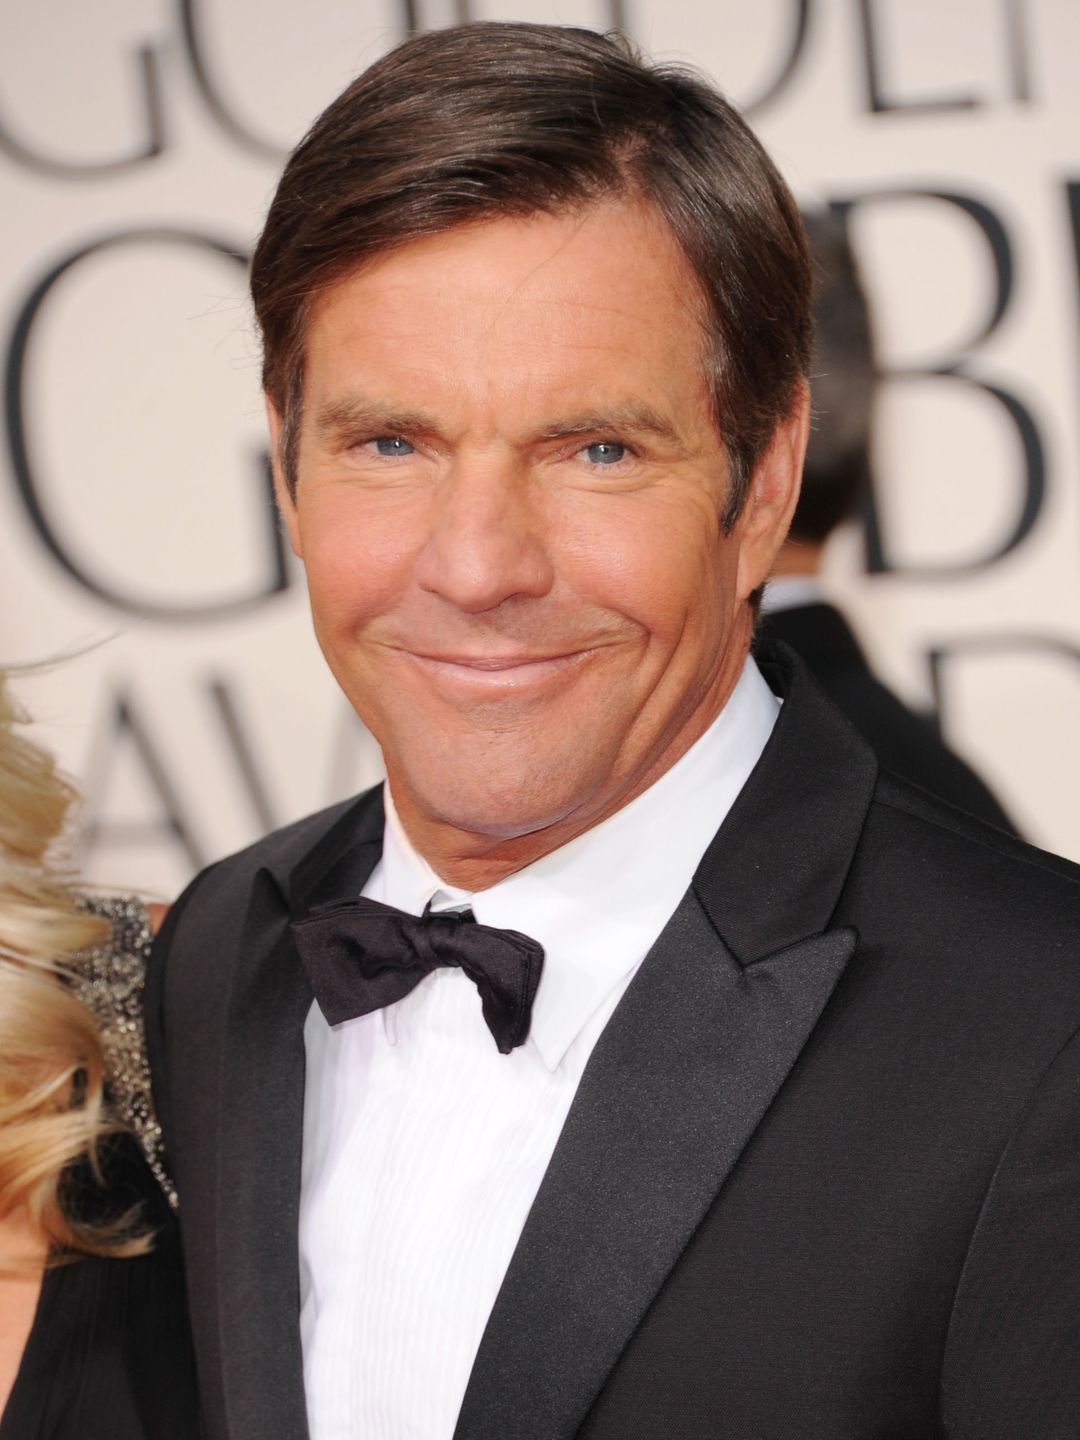 Dennis Quaid height and weight